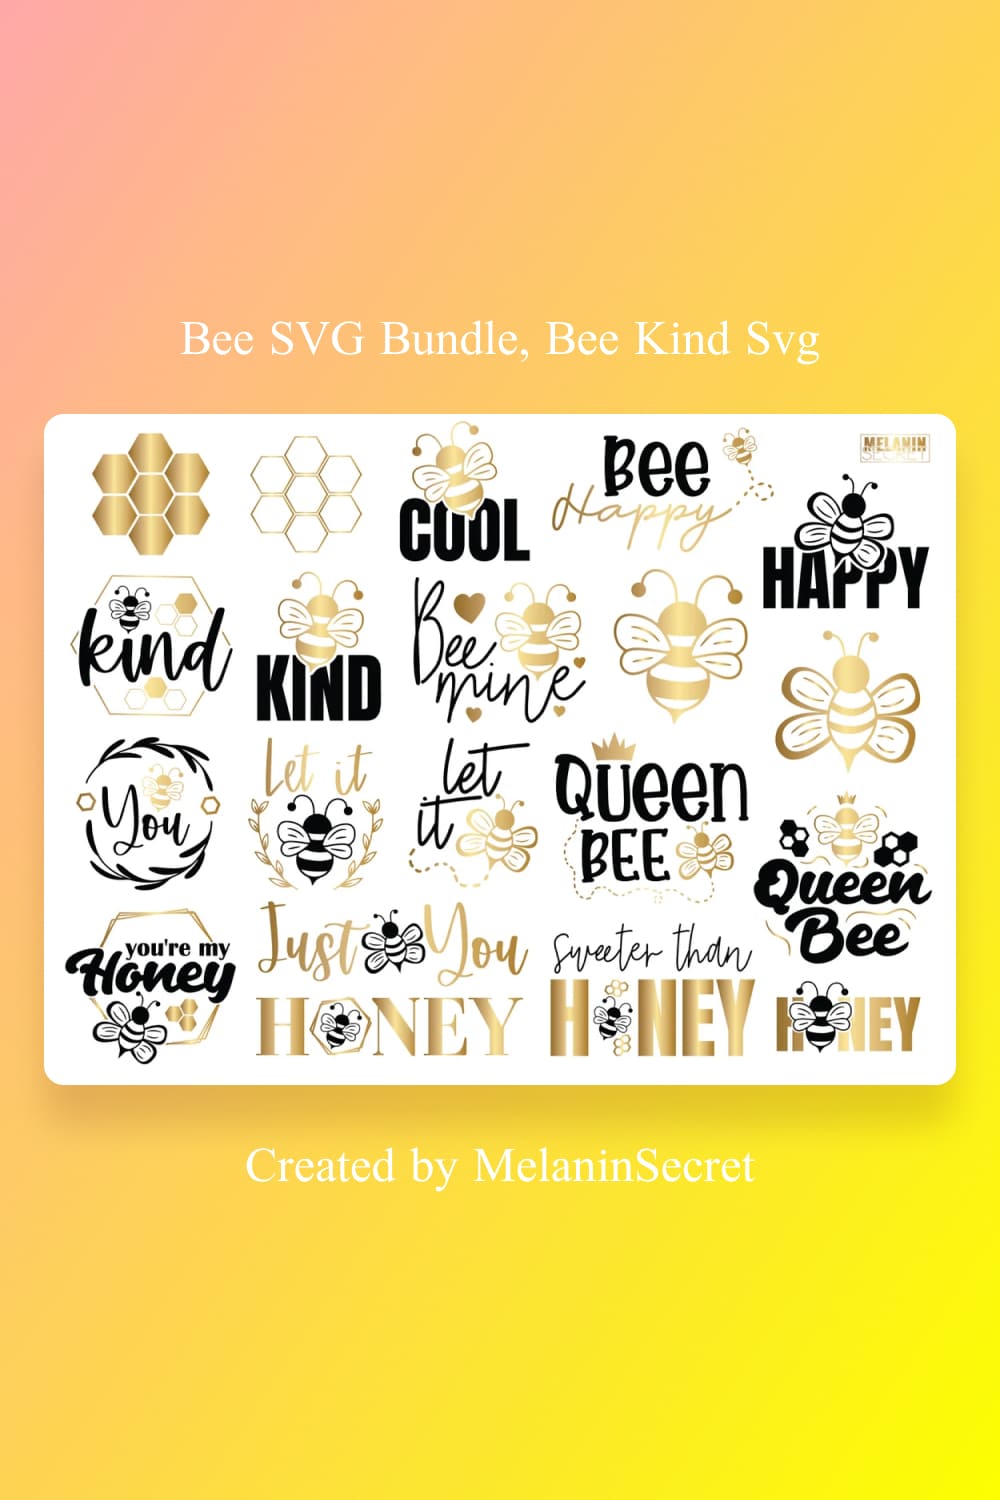 Bee Bundle SVG preview of Pinterest image.